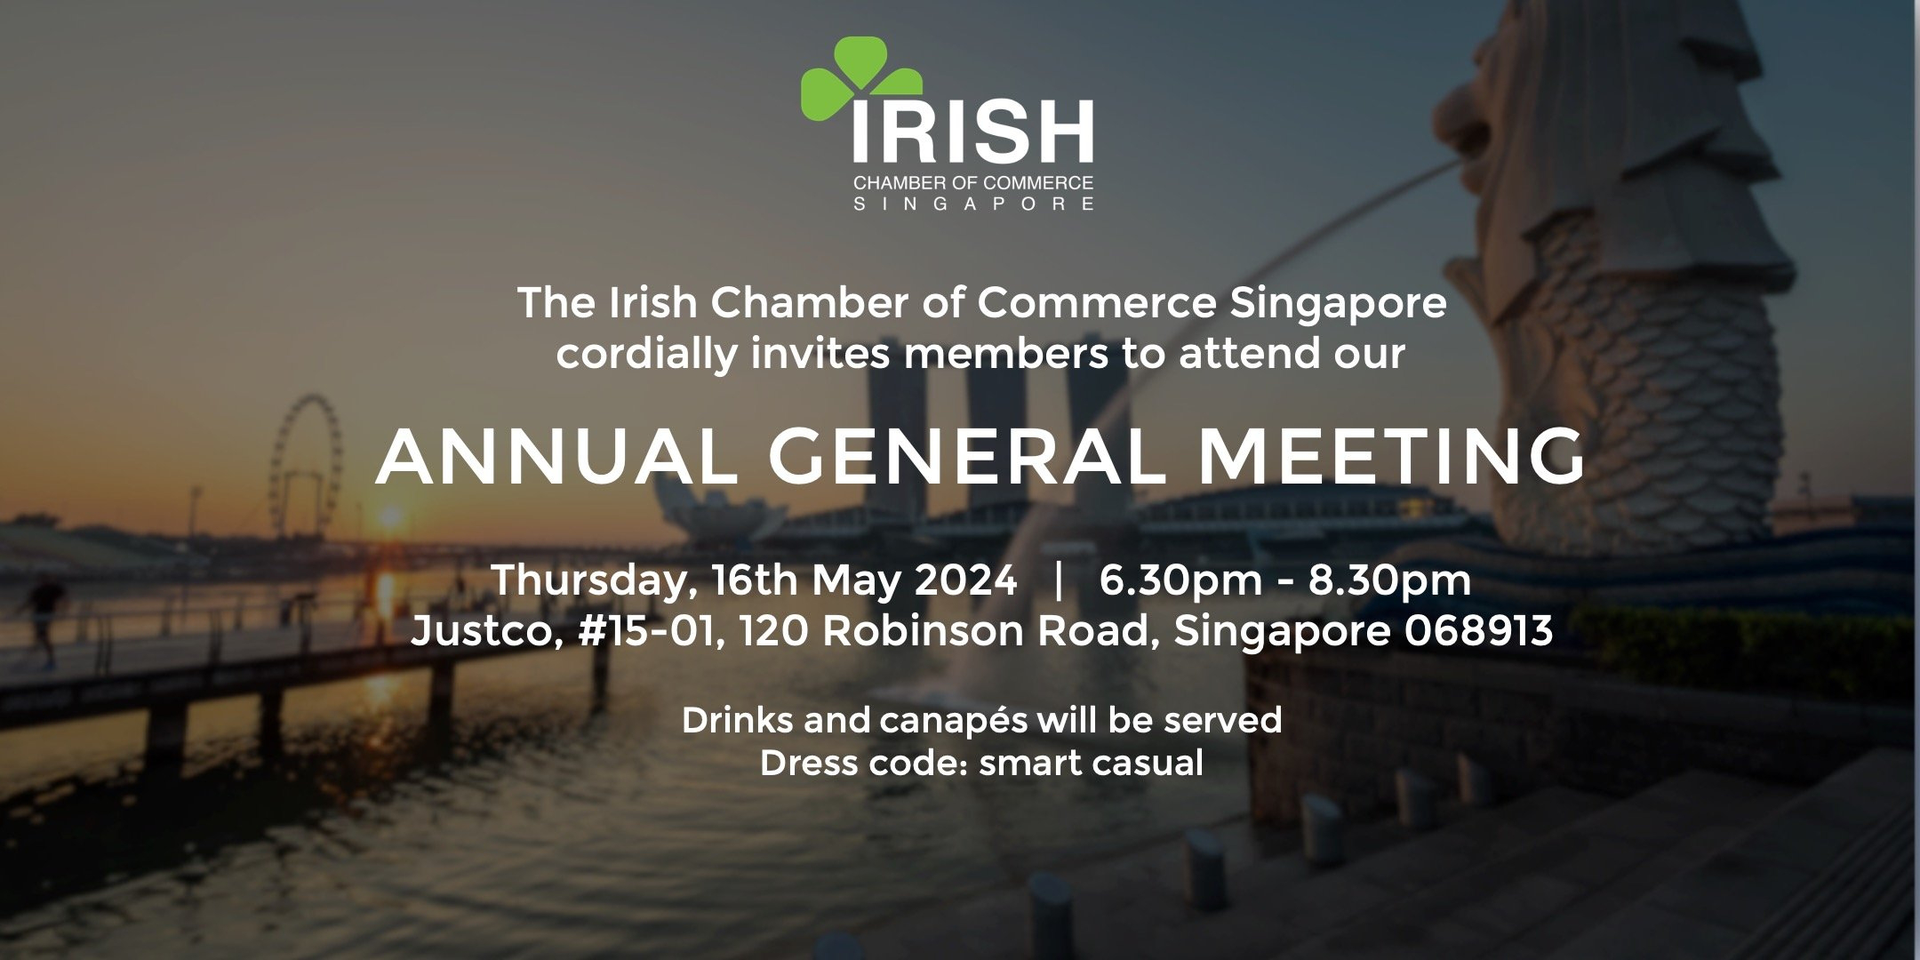 thumbnails Irish Chamber of Commerce Singapore's 2024 A.G.M. - 16th May in the CBD